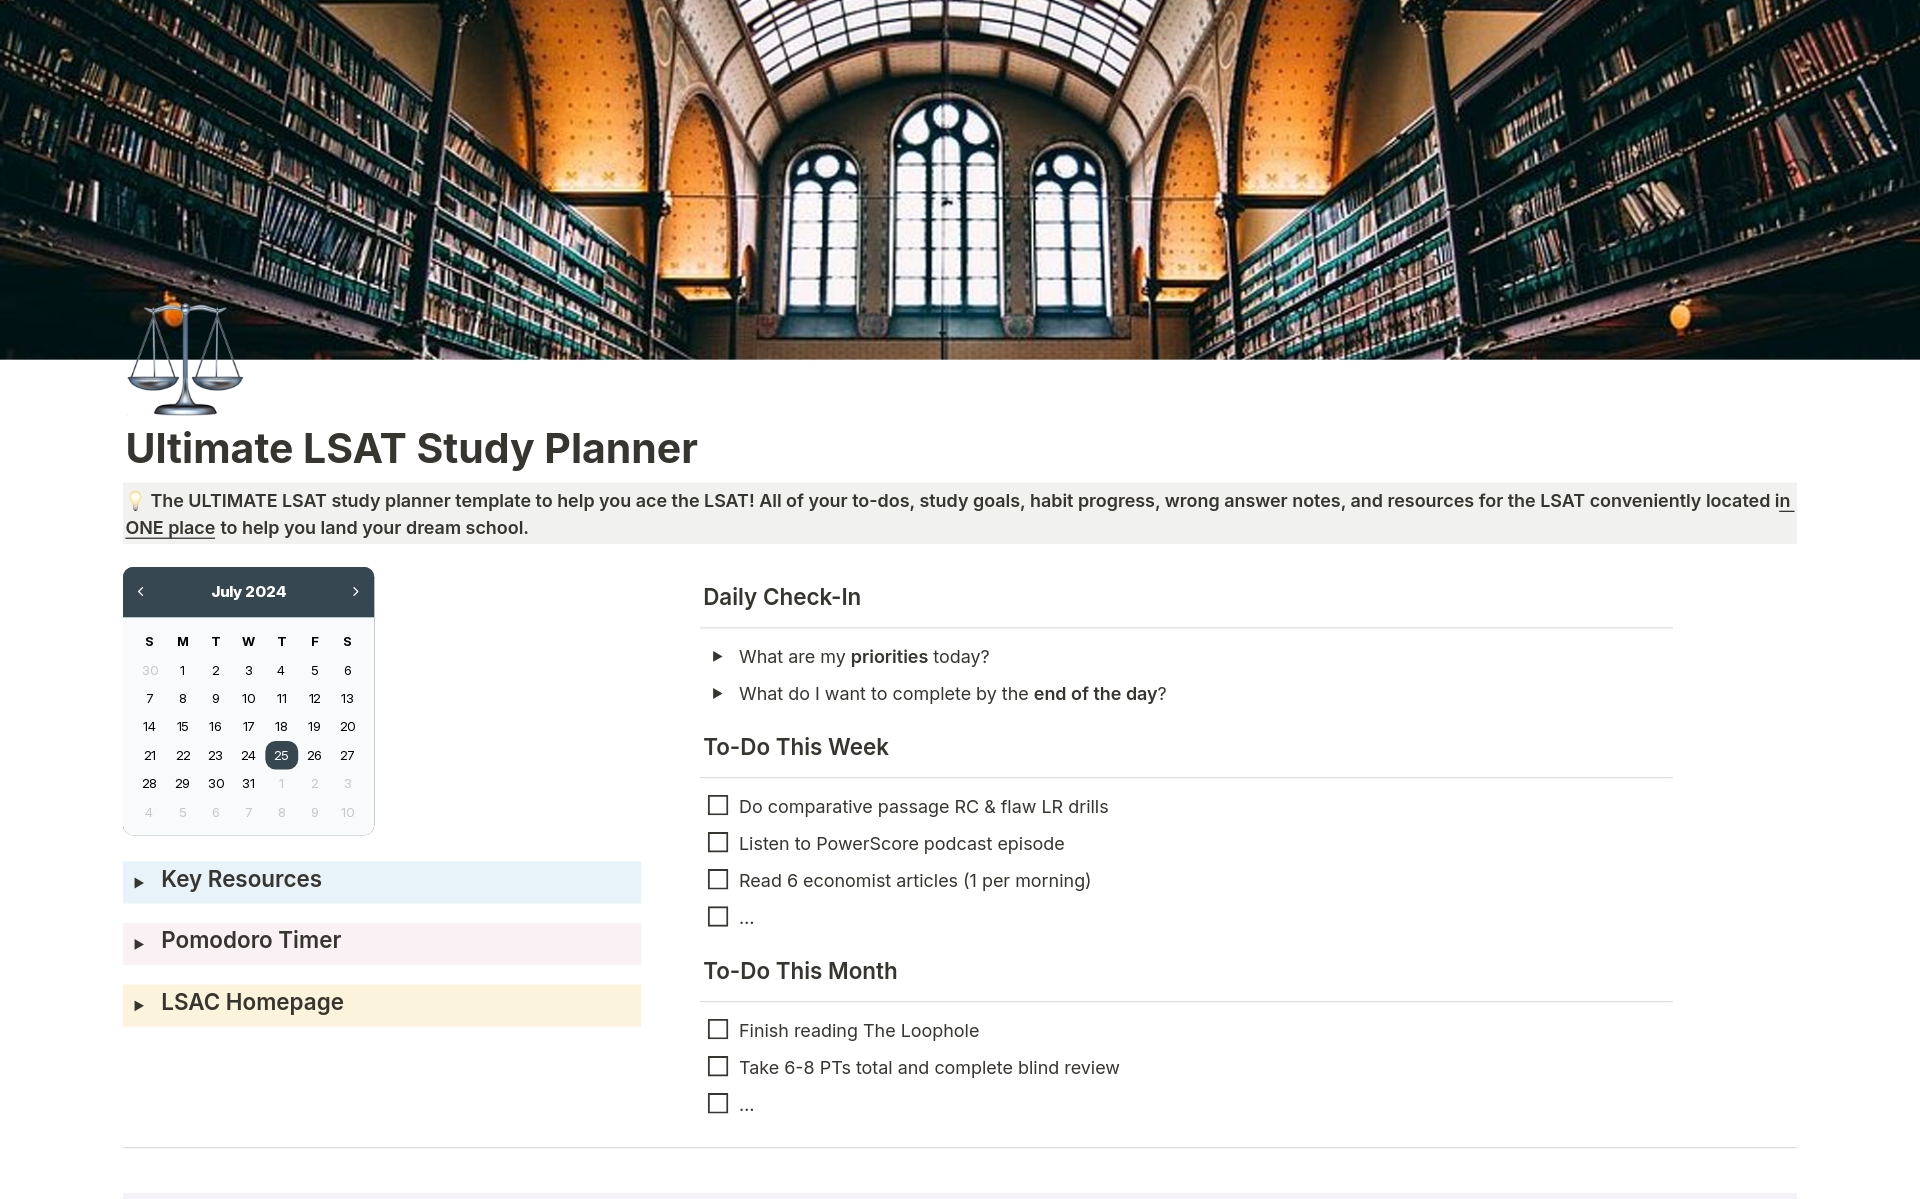 💡 The ULTIMATE LSAT study planner template to help you ace the LSAT! All of your to-dos, study goals, habit progress, wrong answer notes, and resources for the LSAT conveniently located in ONE place to help you land your dream school. 